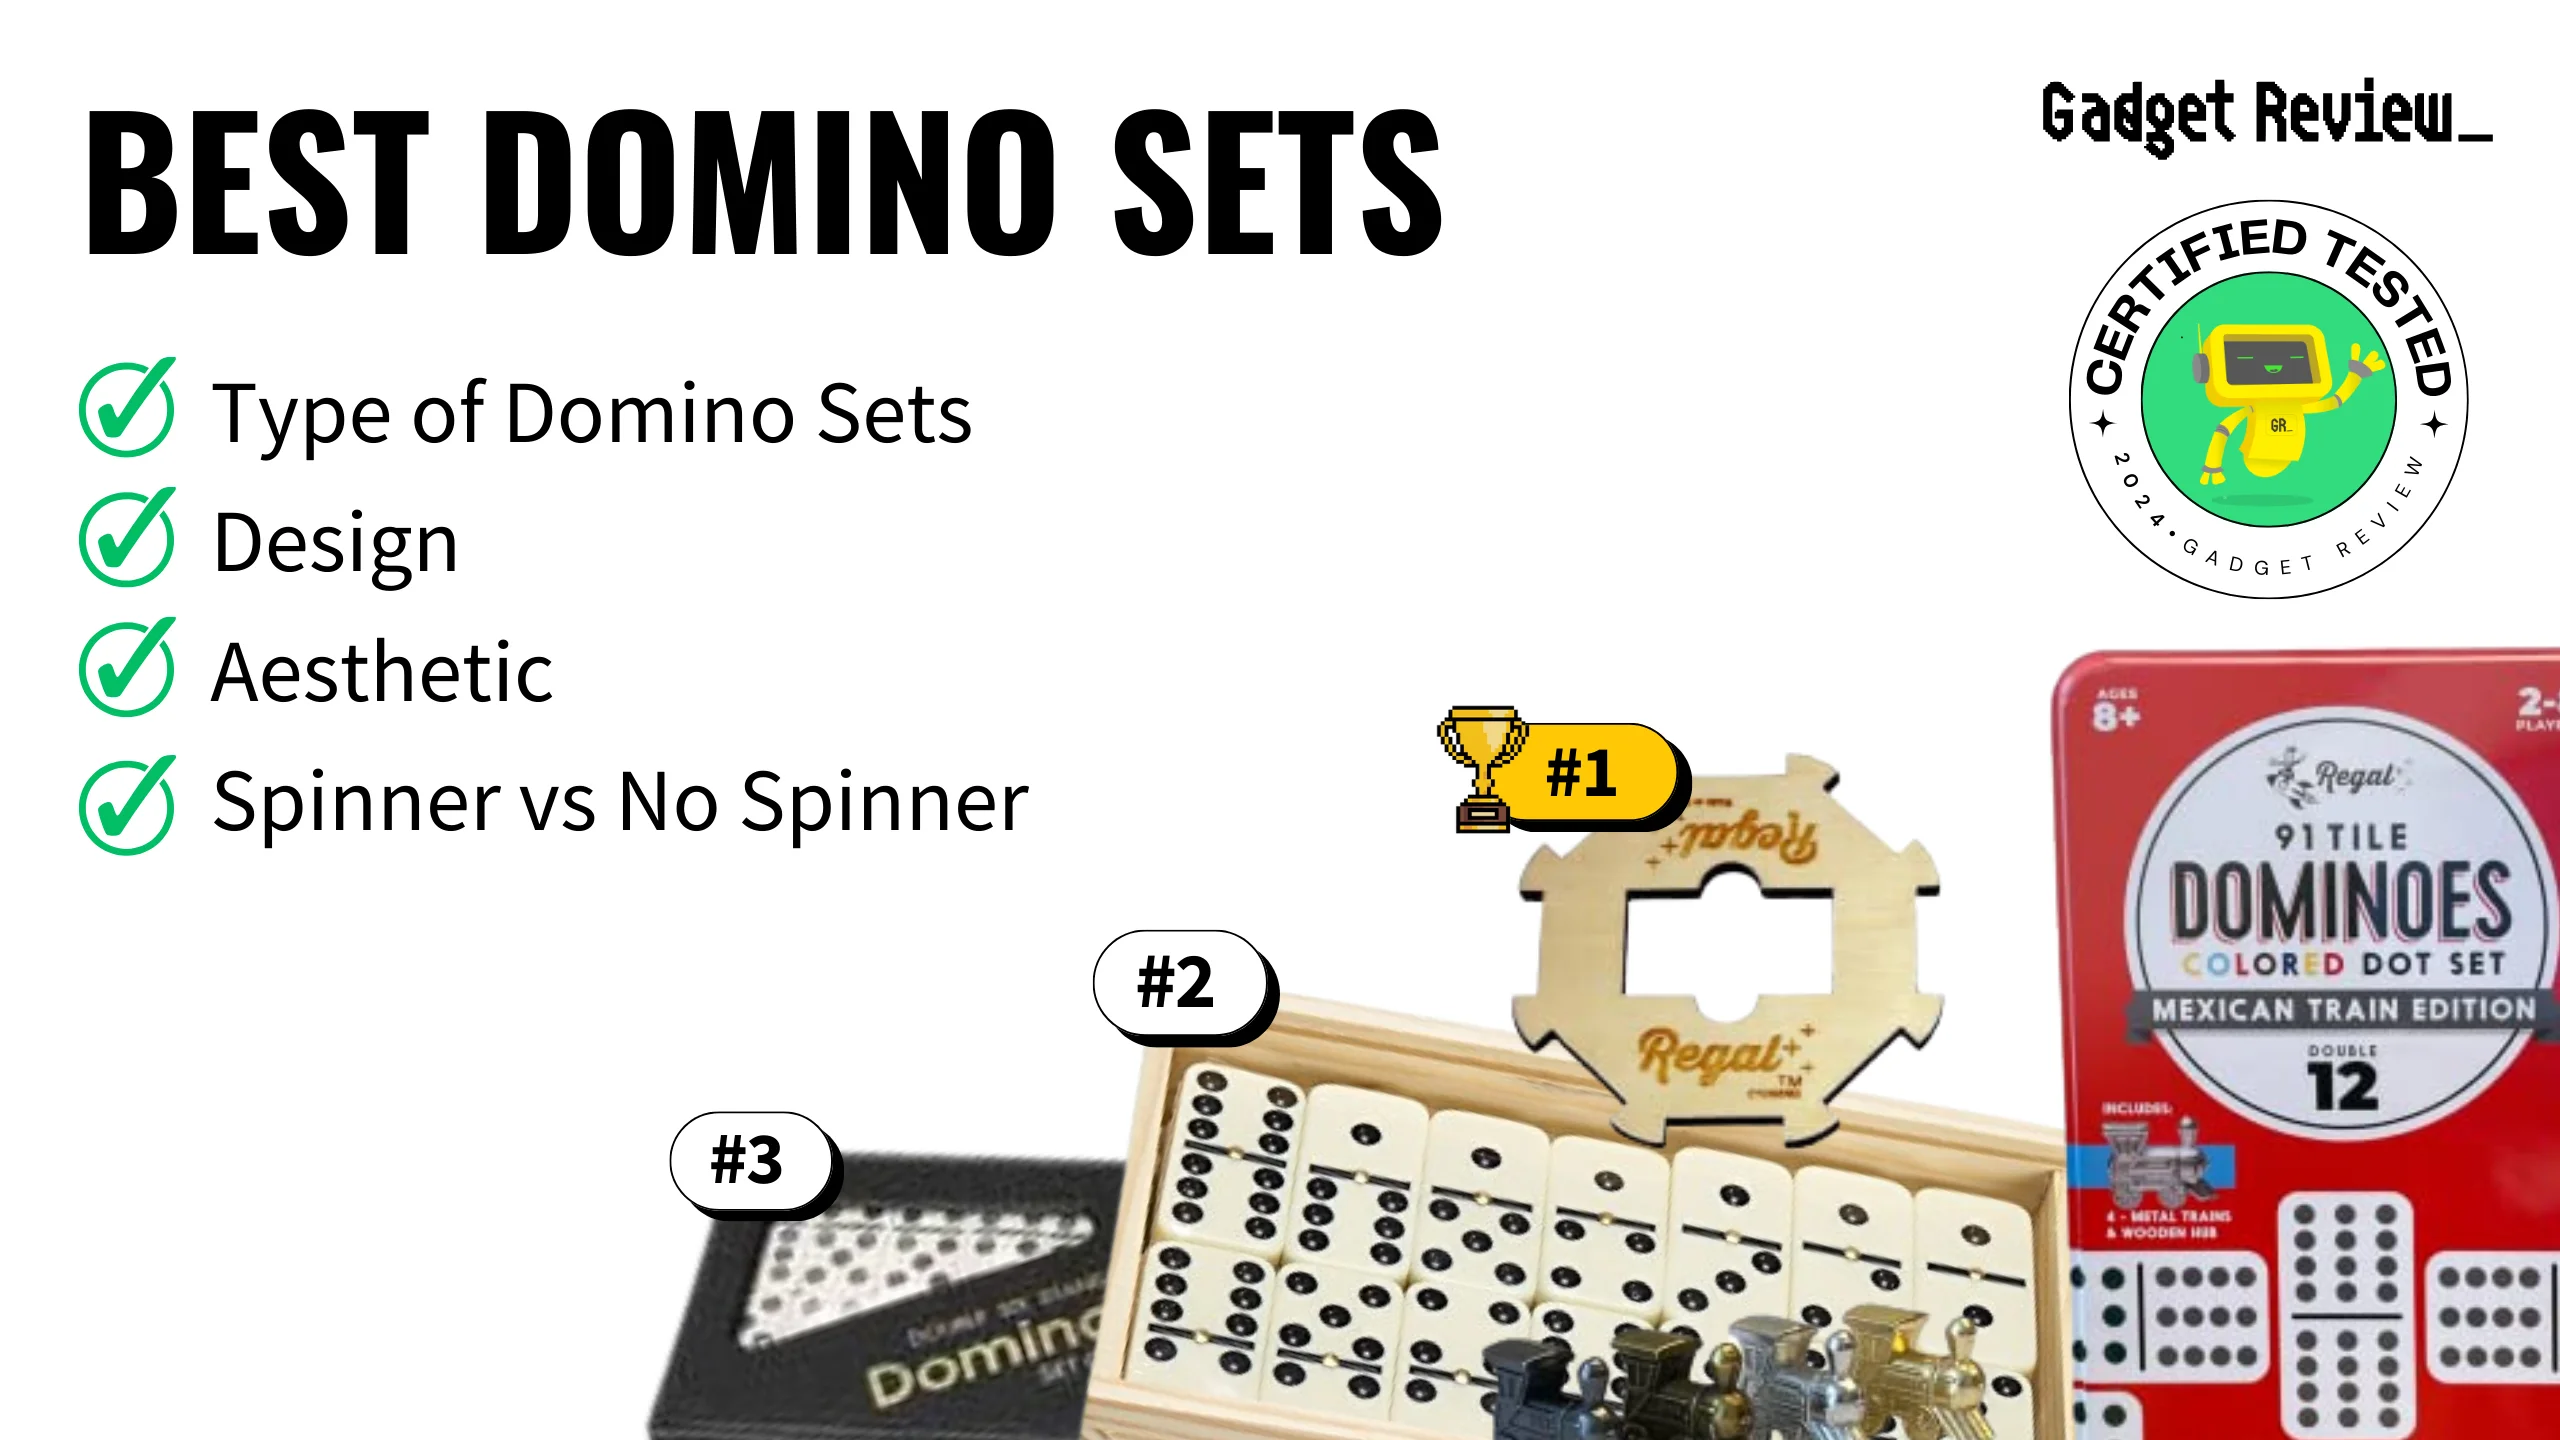 best domino sets guide that shows the top best toys & game model